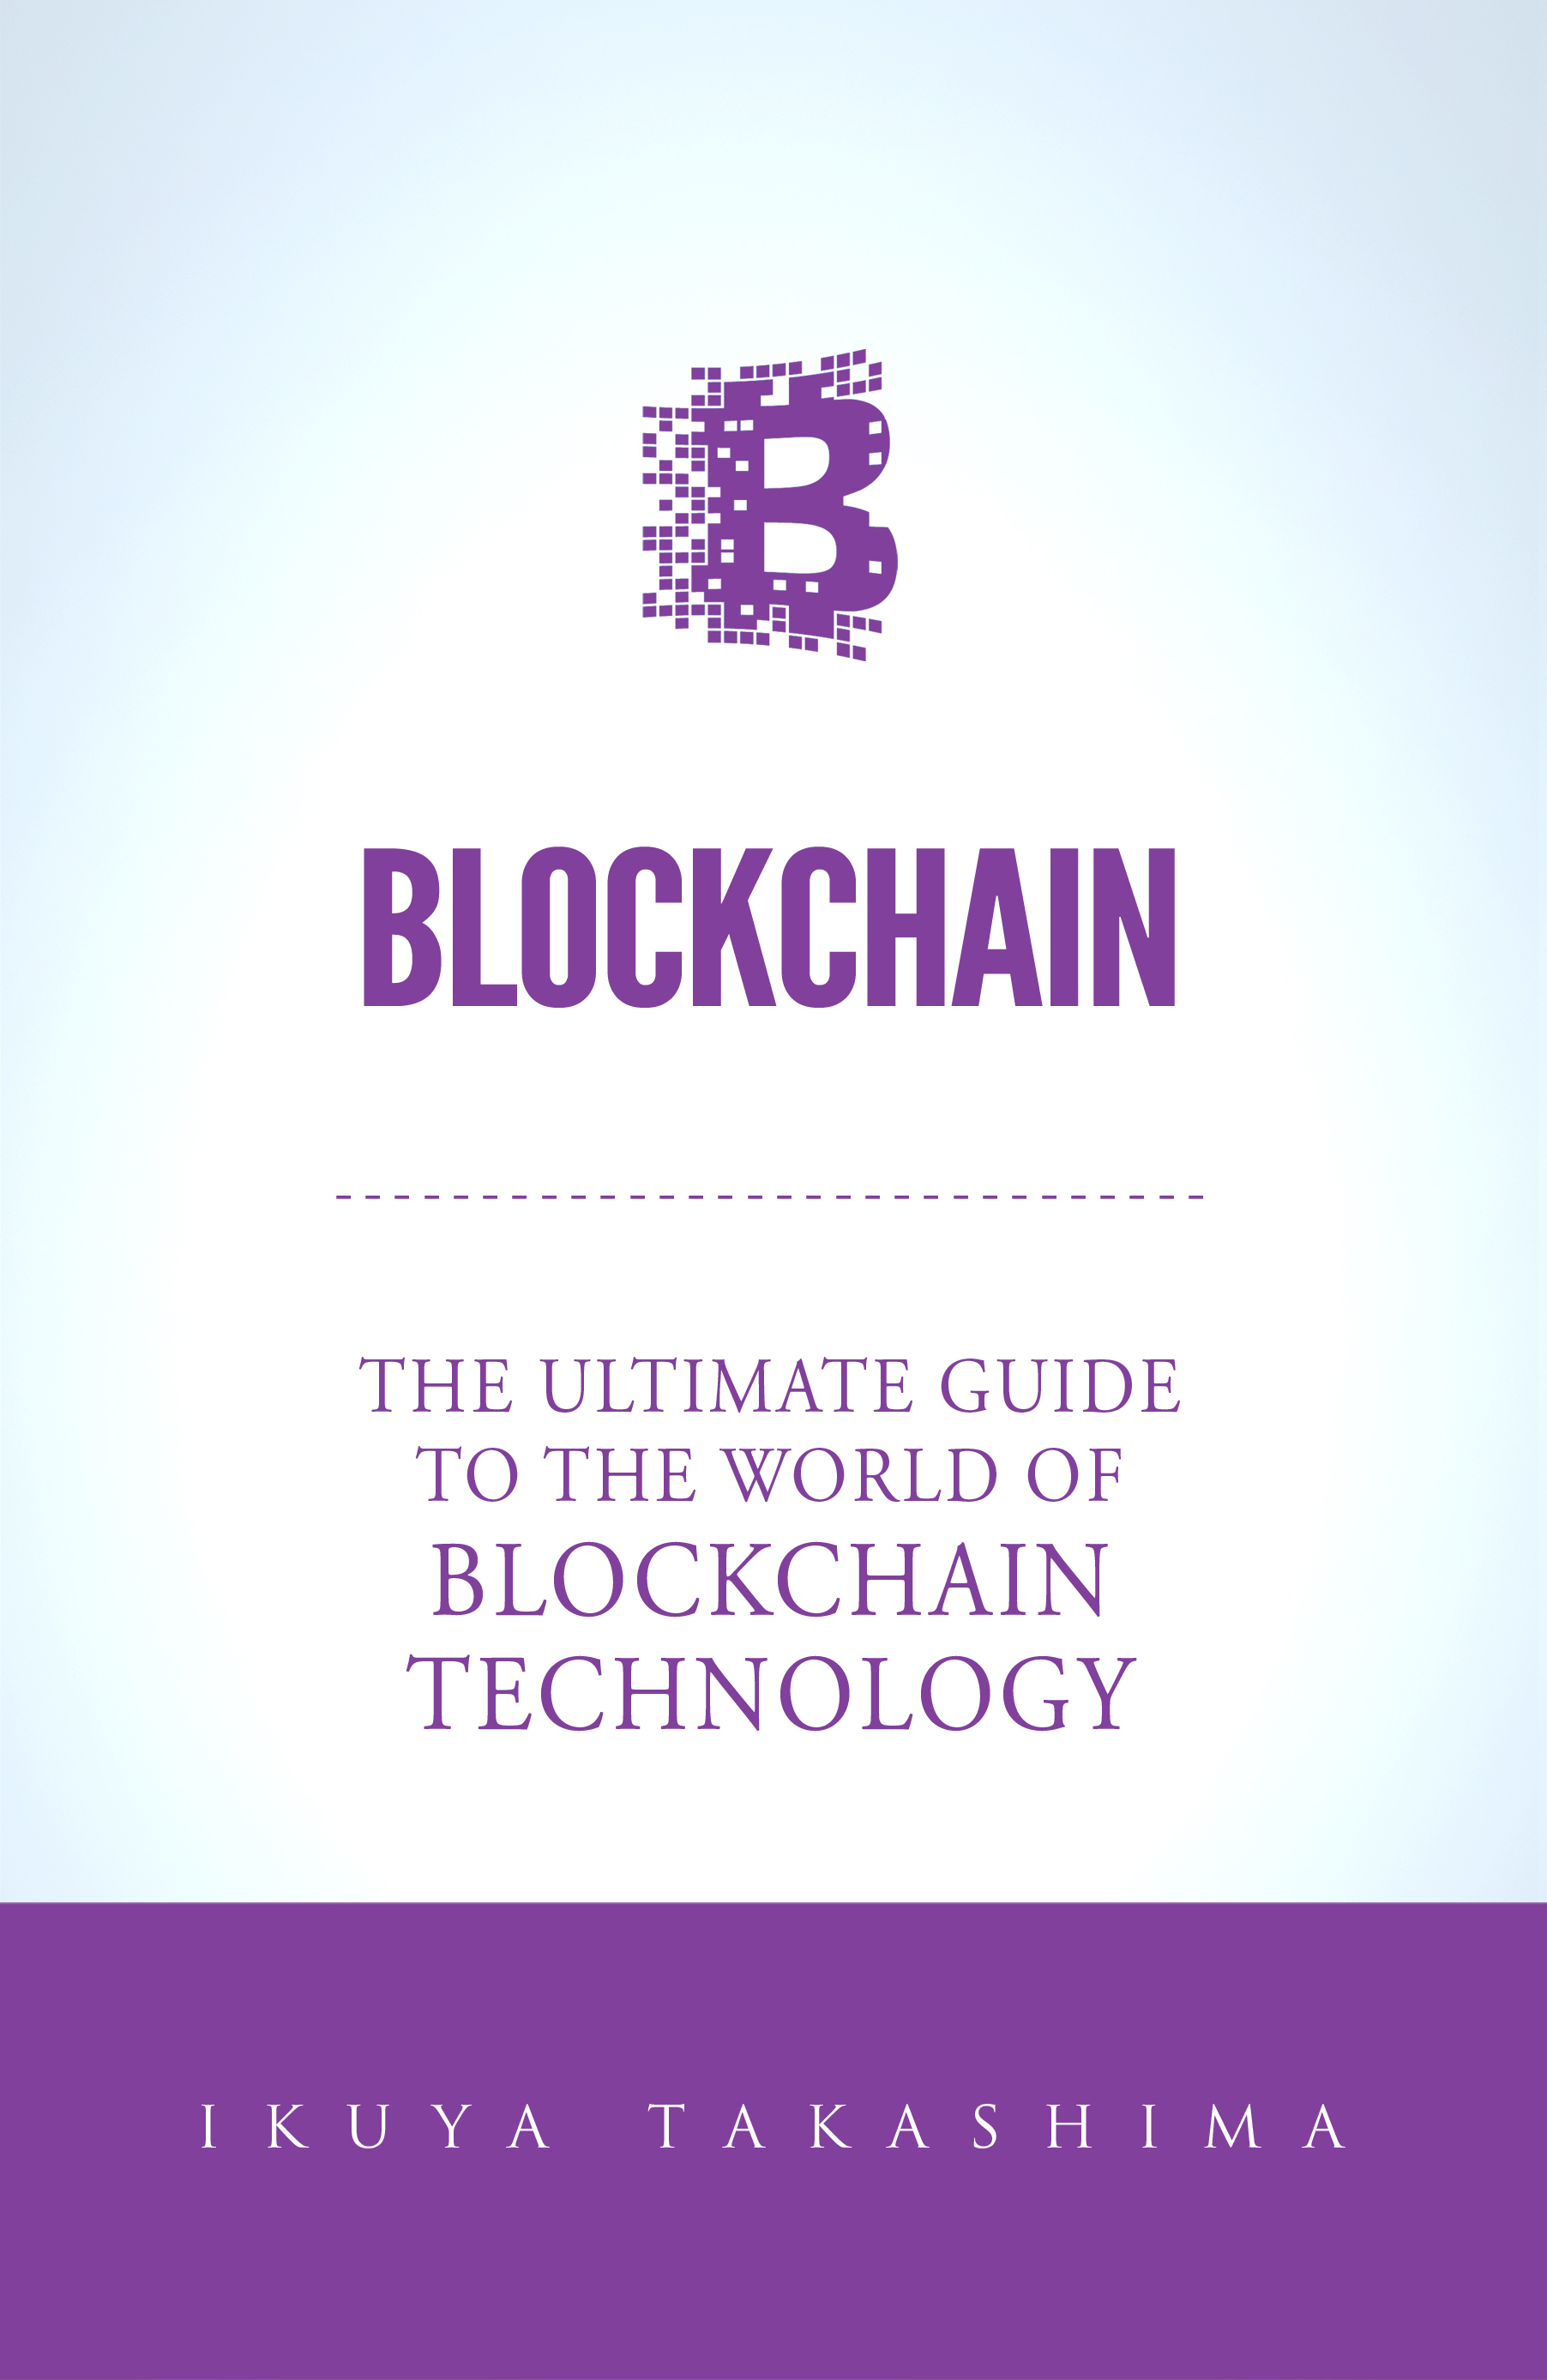 FREE: Blockchain: The Ultimate Guide To The World Of Blockchain Technology, Bitcoin, Ethereum, Cryptocurrency, Smart Contracts by Ikuya Takashima